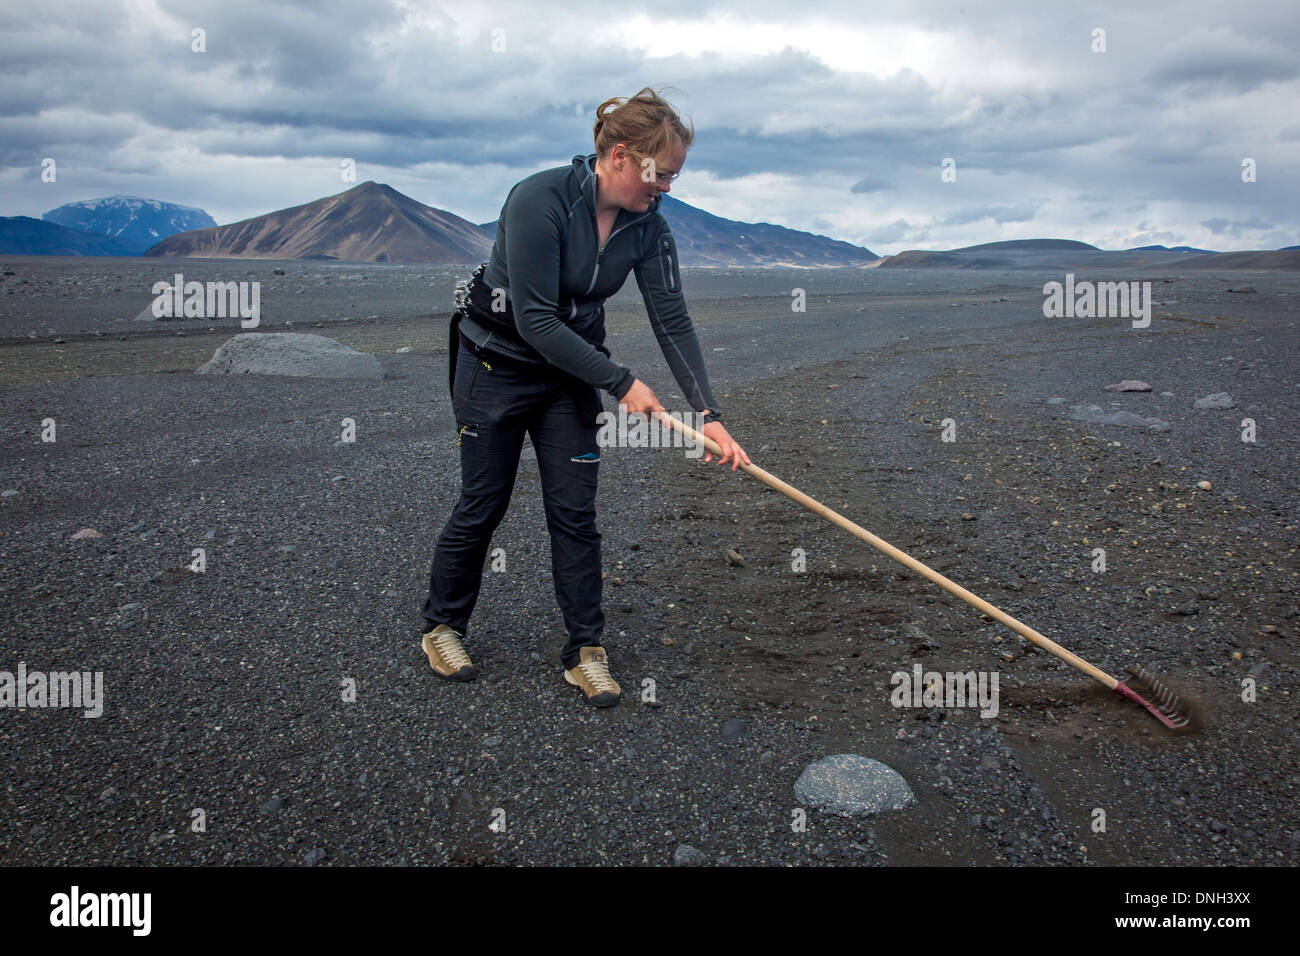 YOUNG WOMAN RESTORING F 910 WORN BY 4X4 VEHICLES, TRAIL LEADING TO THE VOLCANO ASKJA AND THE KVERKFJOLL MOUNTAIN, VOLCANIC DESERT AND LAVA FIELD, HIGHLANDS OF ICELAND, NORDURLAND EYSTRA, EASTERN CENTRE OF ICELAND, EUROPE Stock Photo